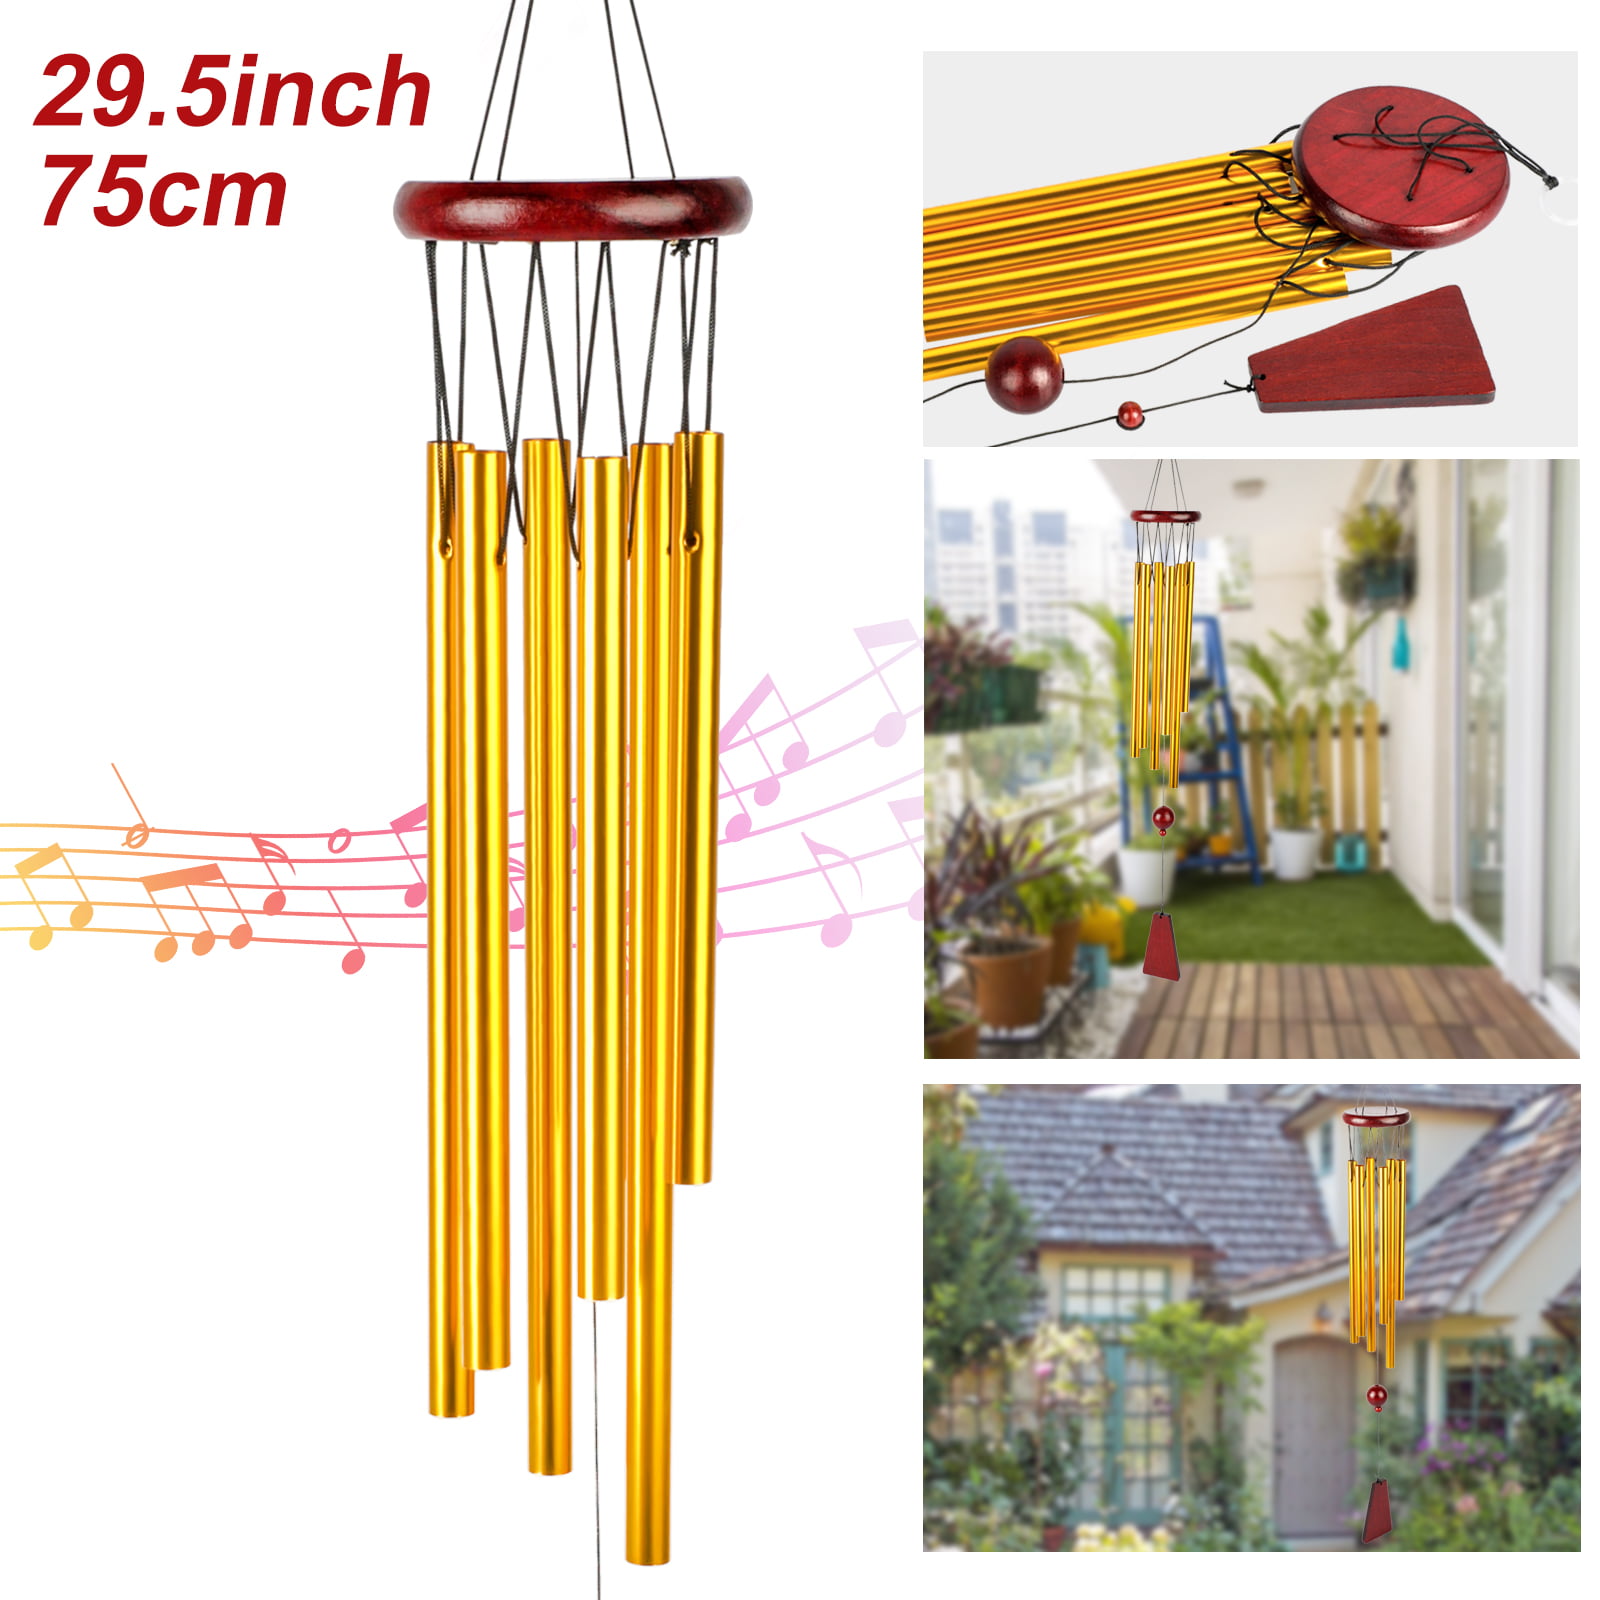 29'' 6 Metal Tubes Wind Chimes Window Chime Home Garden Decor With Hanging Hook